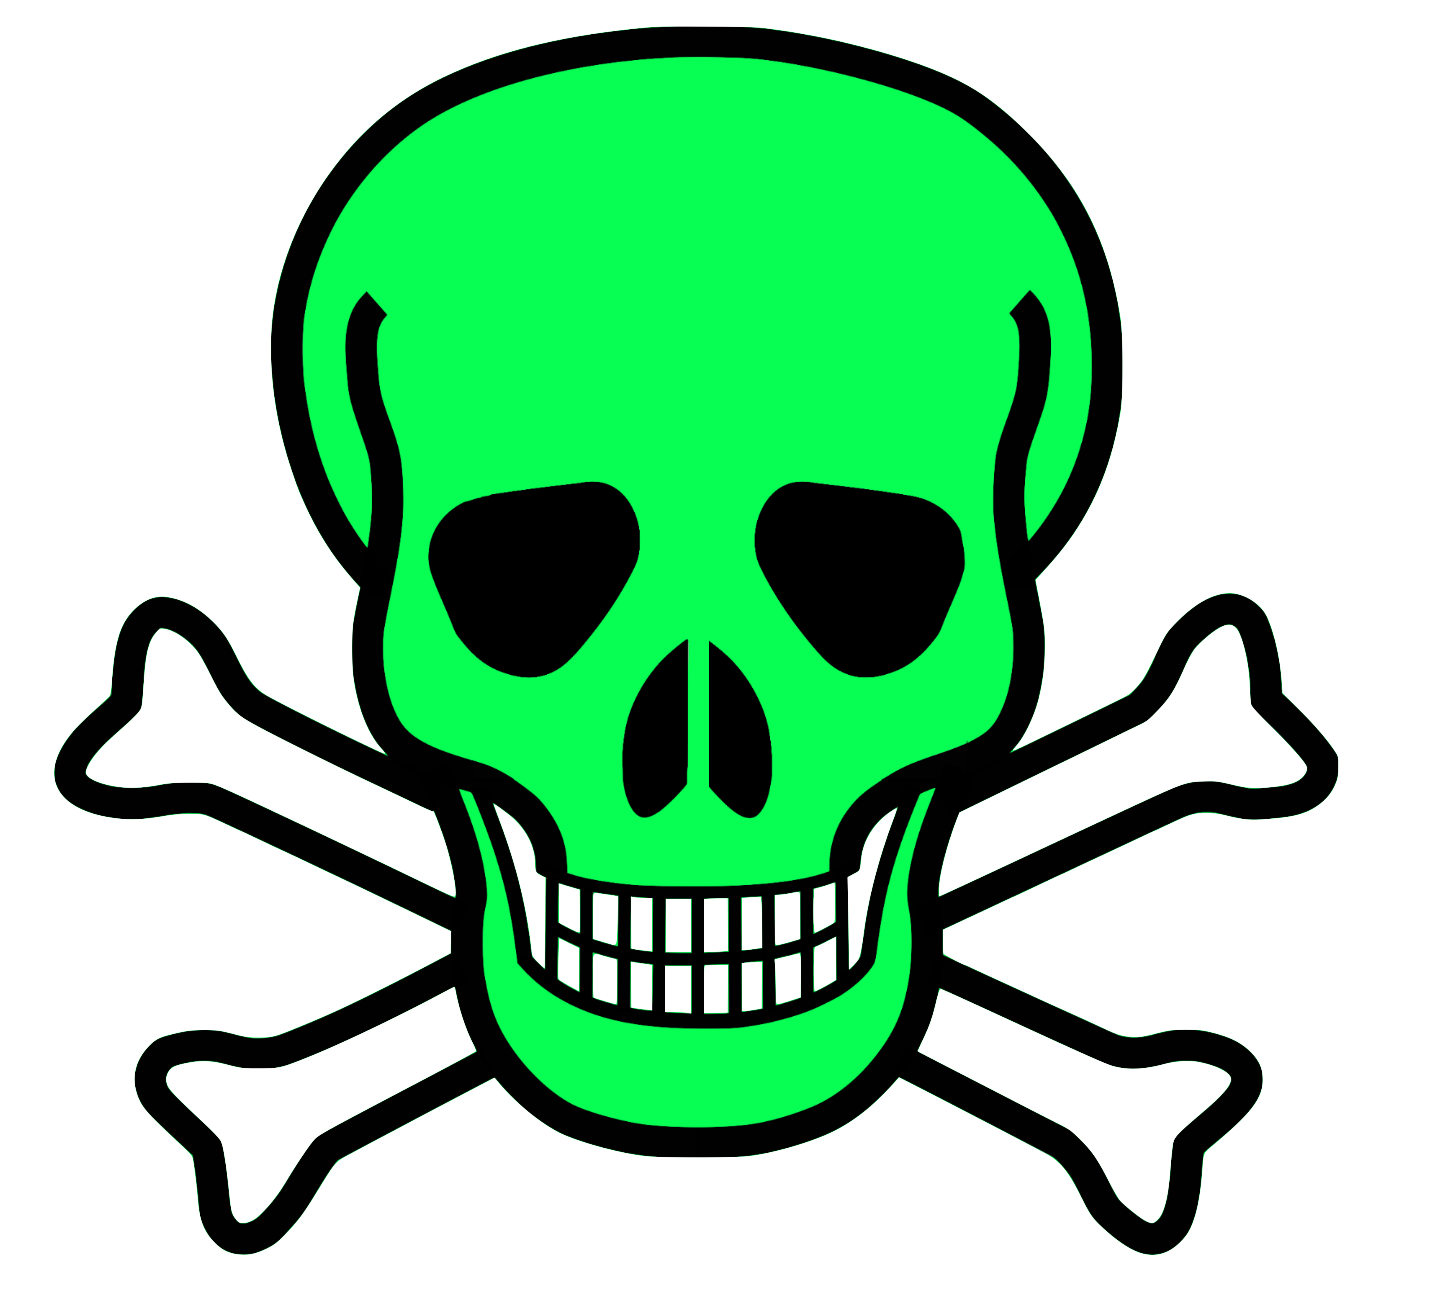 12 Colorful Skulls with white crossbones - 12 separate  images